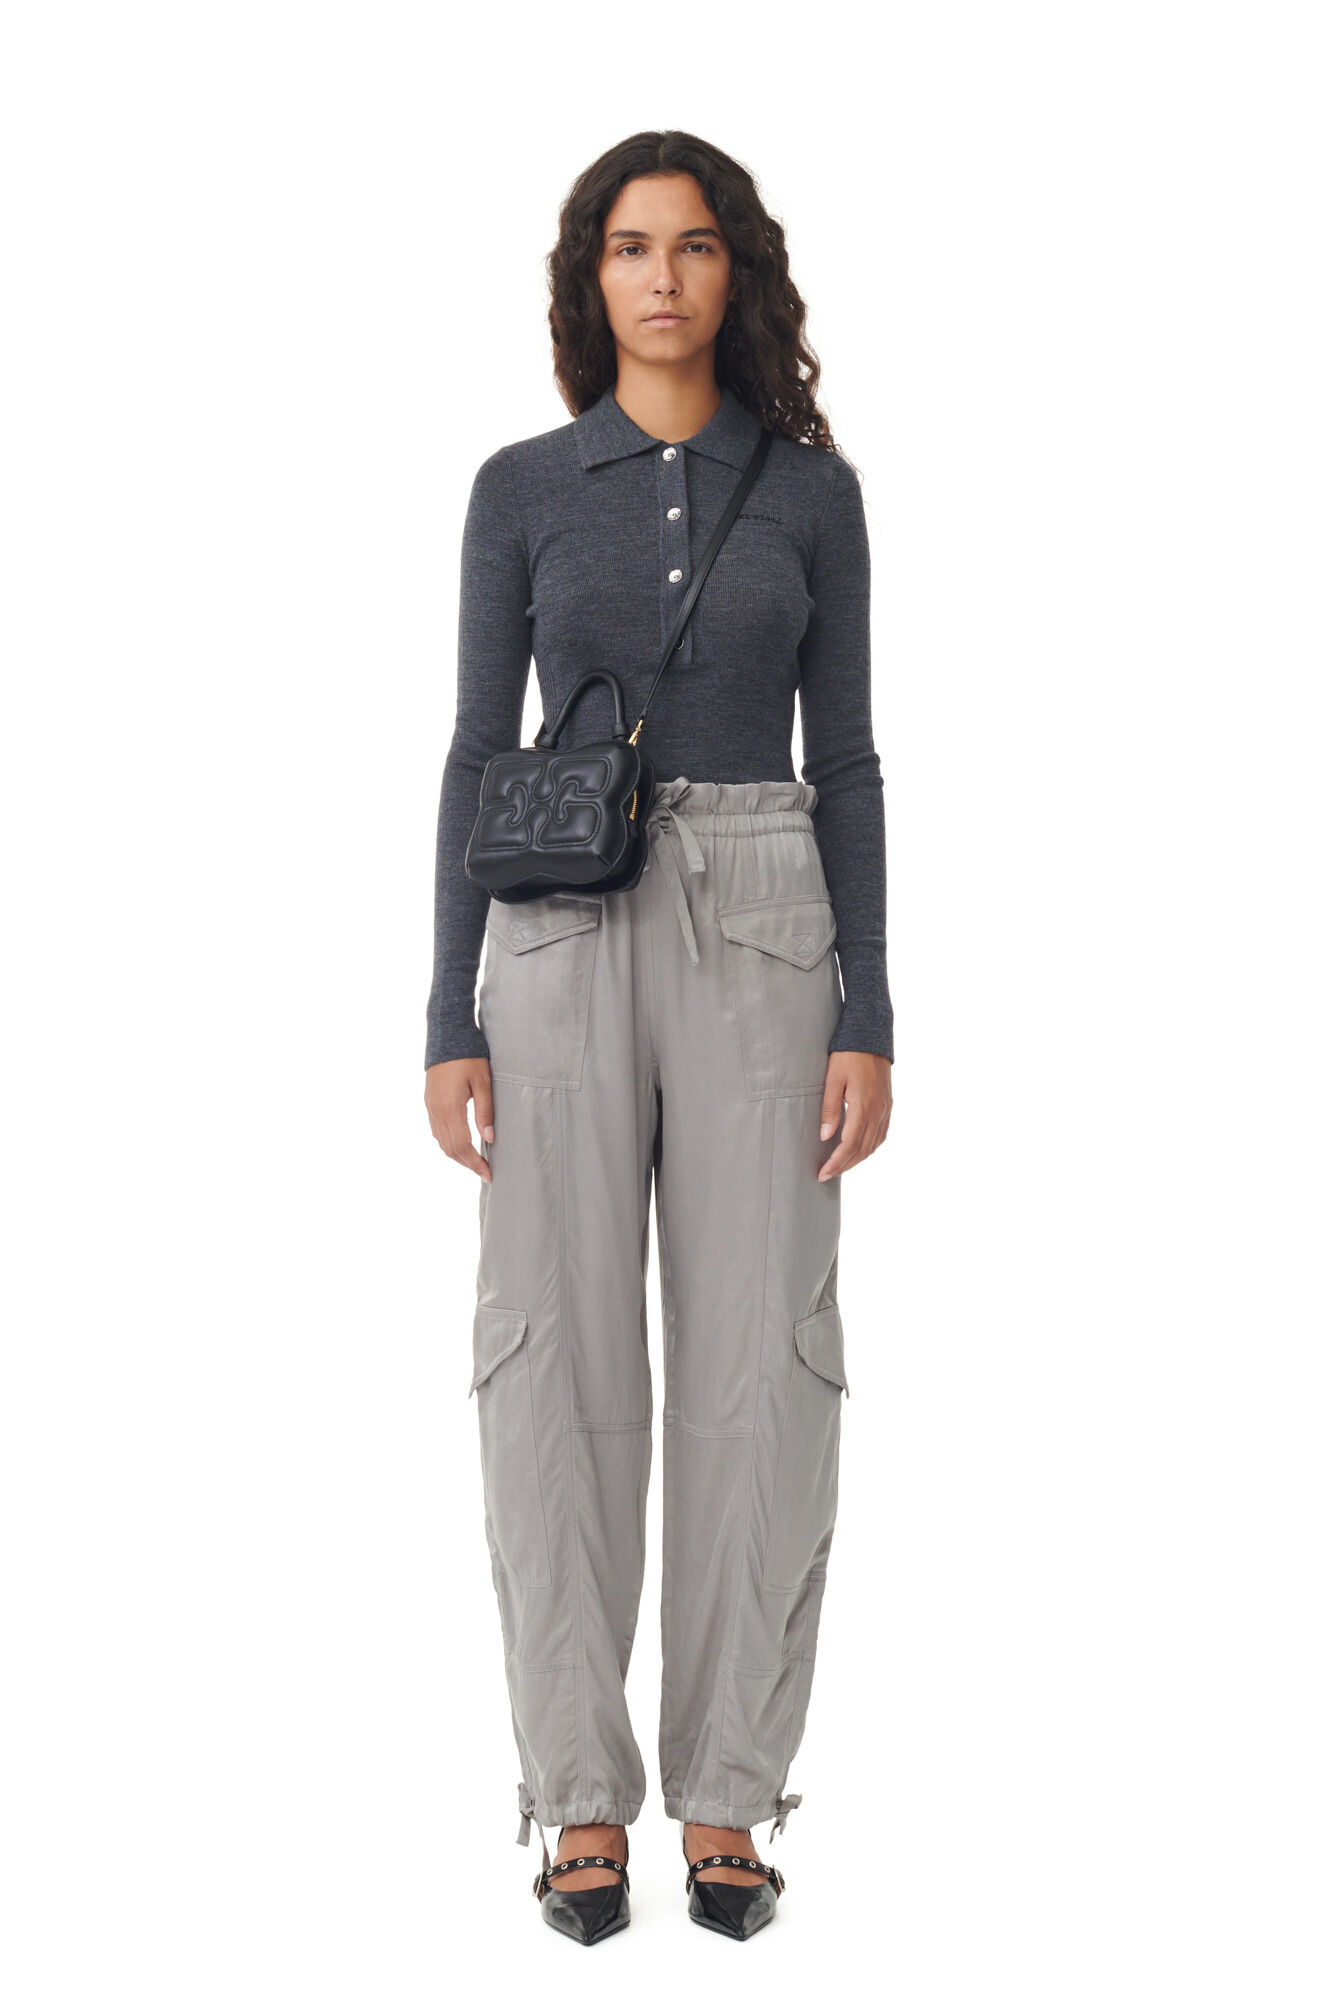 GANNI Washed Satin Pant in Frost Gray 34